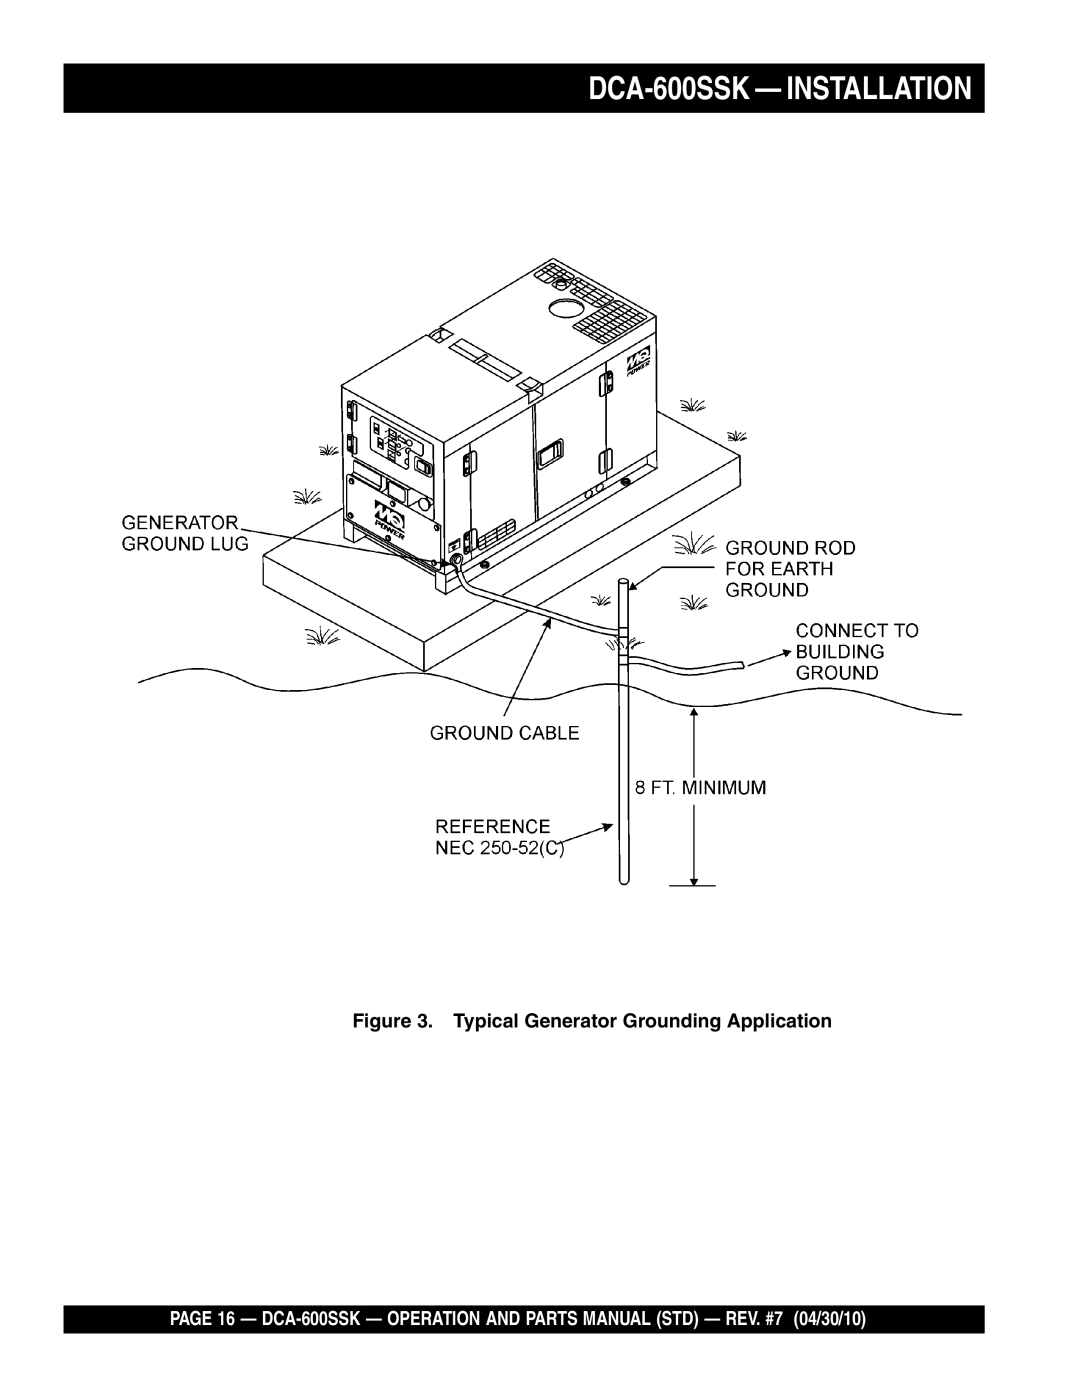 Multiquip operation manual DCA-600SSK - INSTALLATION, Typical Generator Grounding Application 